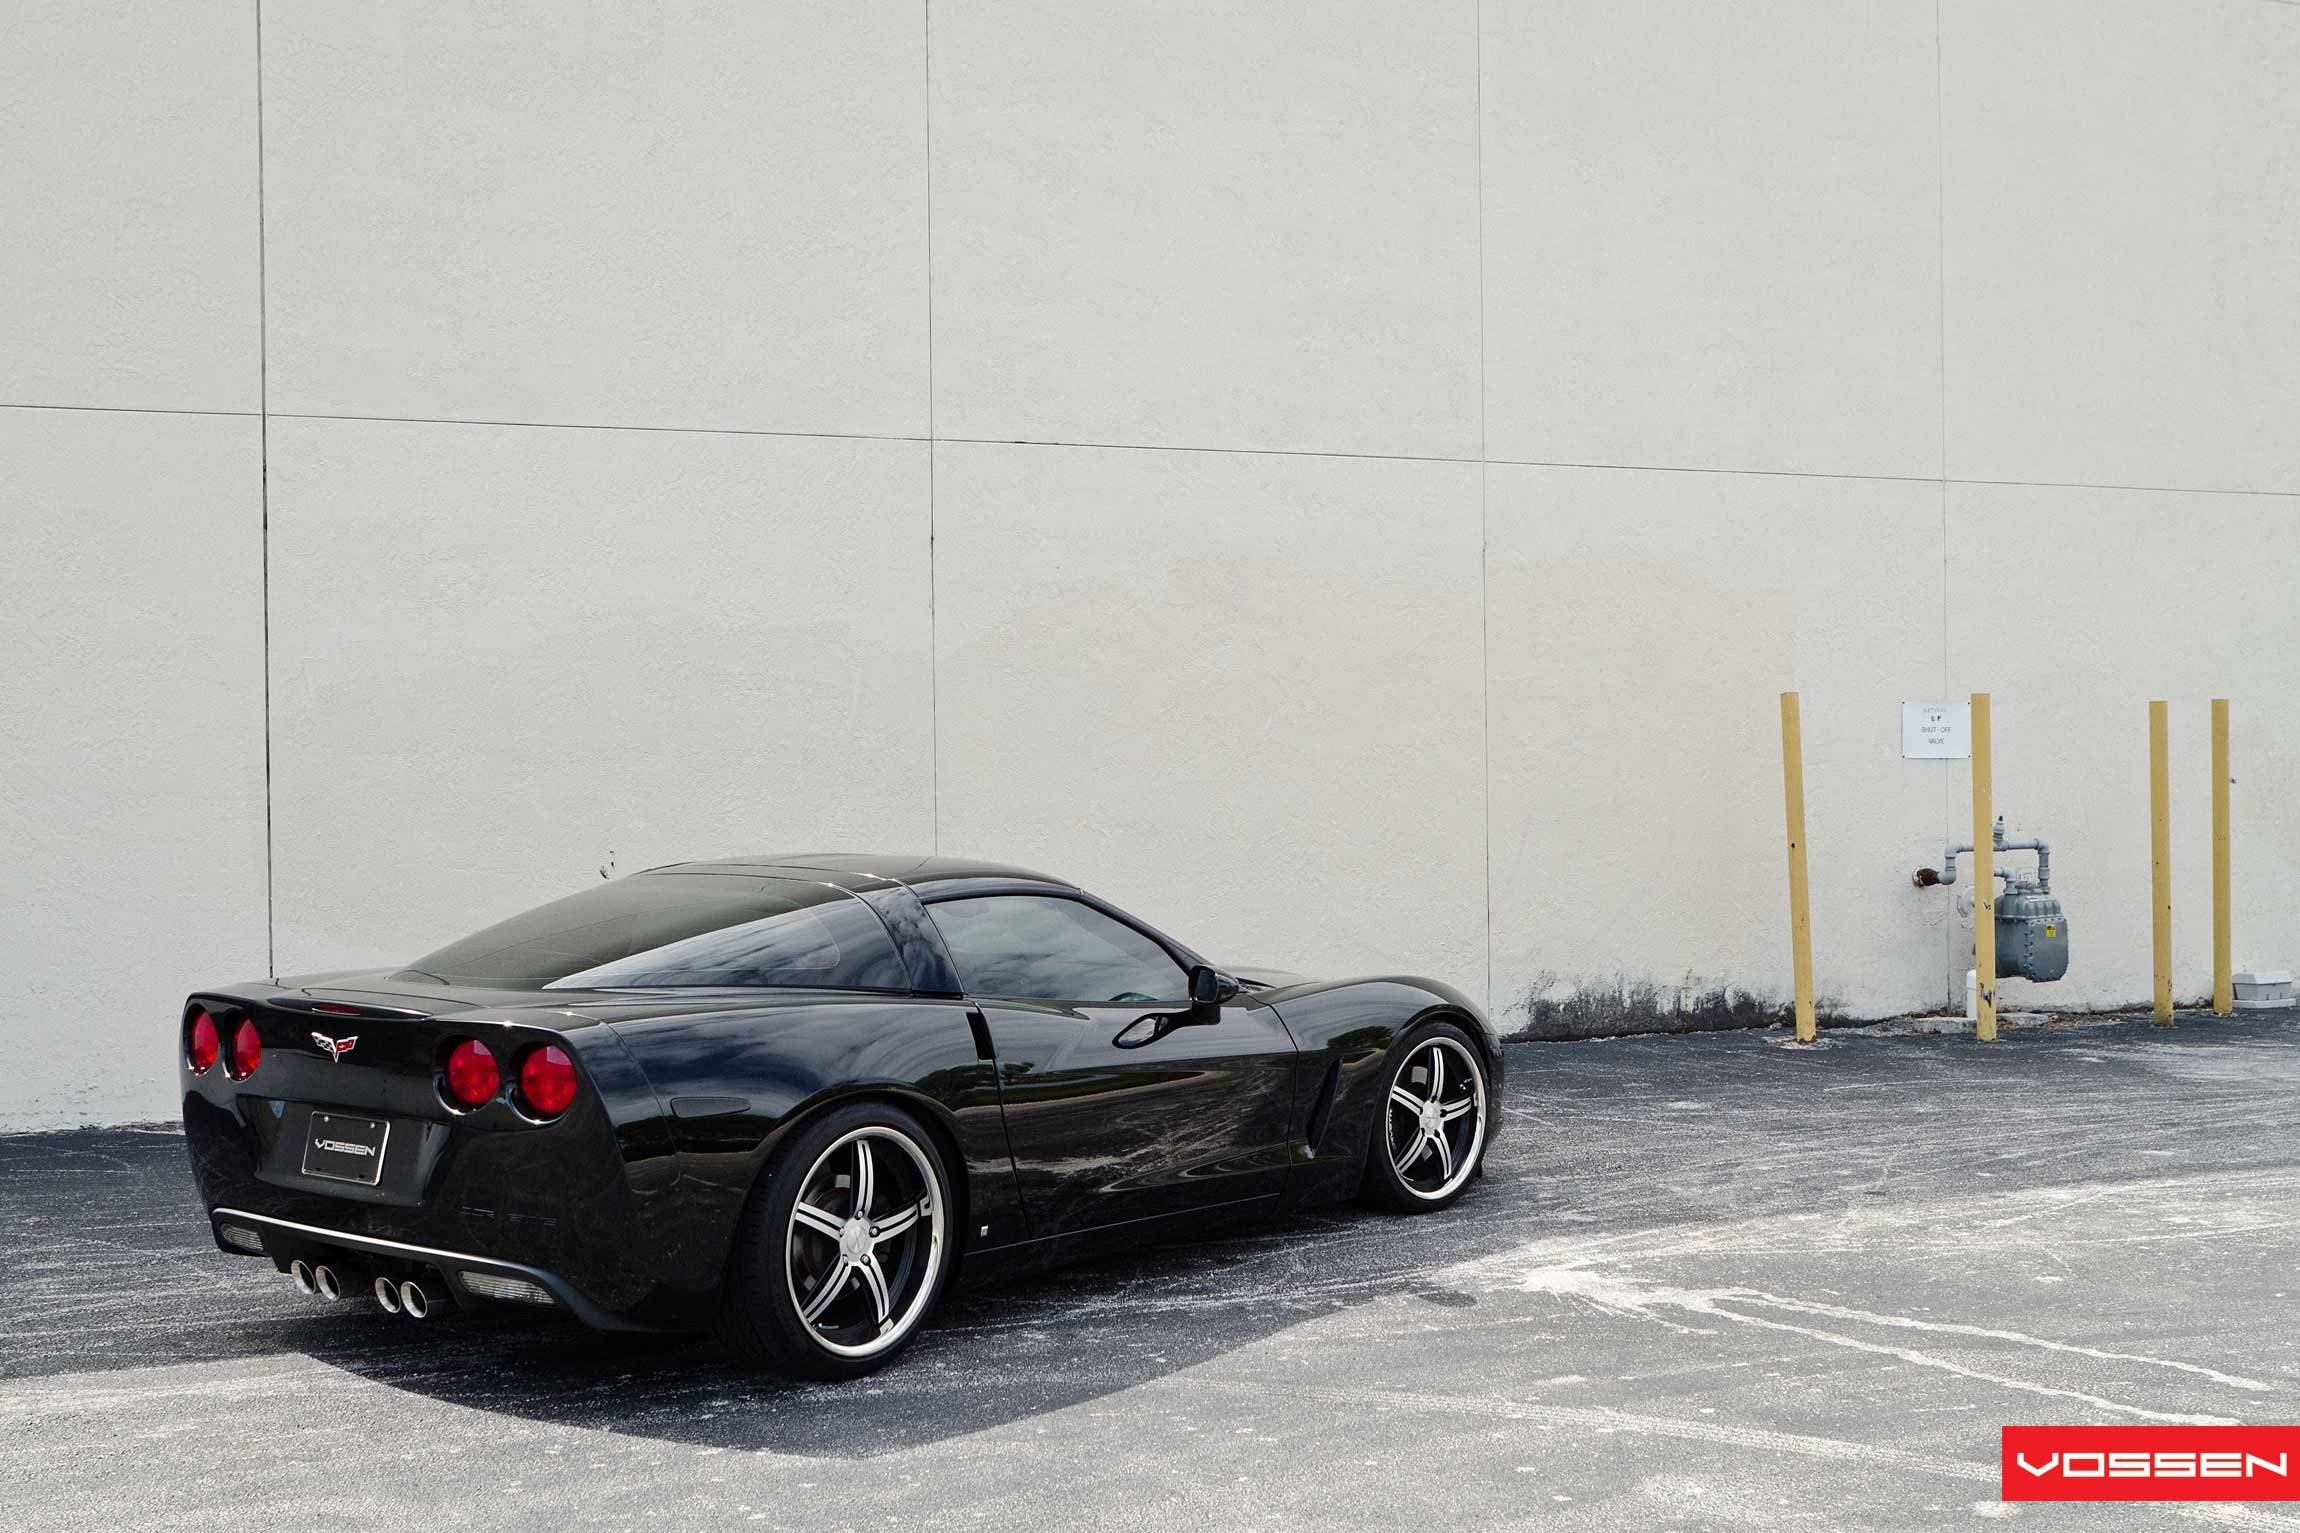 Chevy Corvette with Aftermarket Rear Bumper Cover - Photo by Vossen